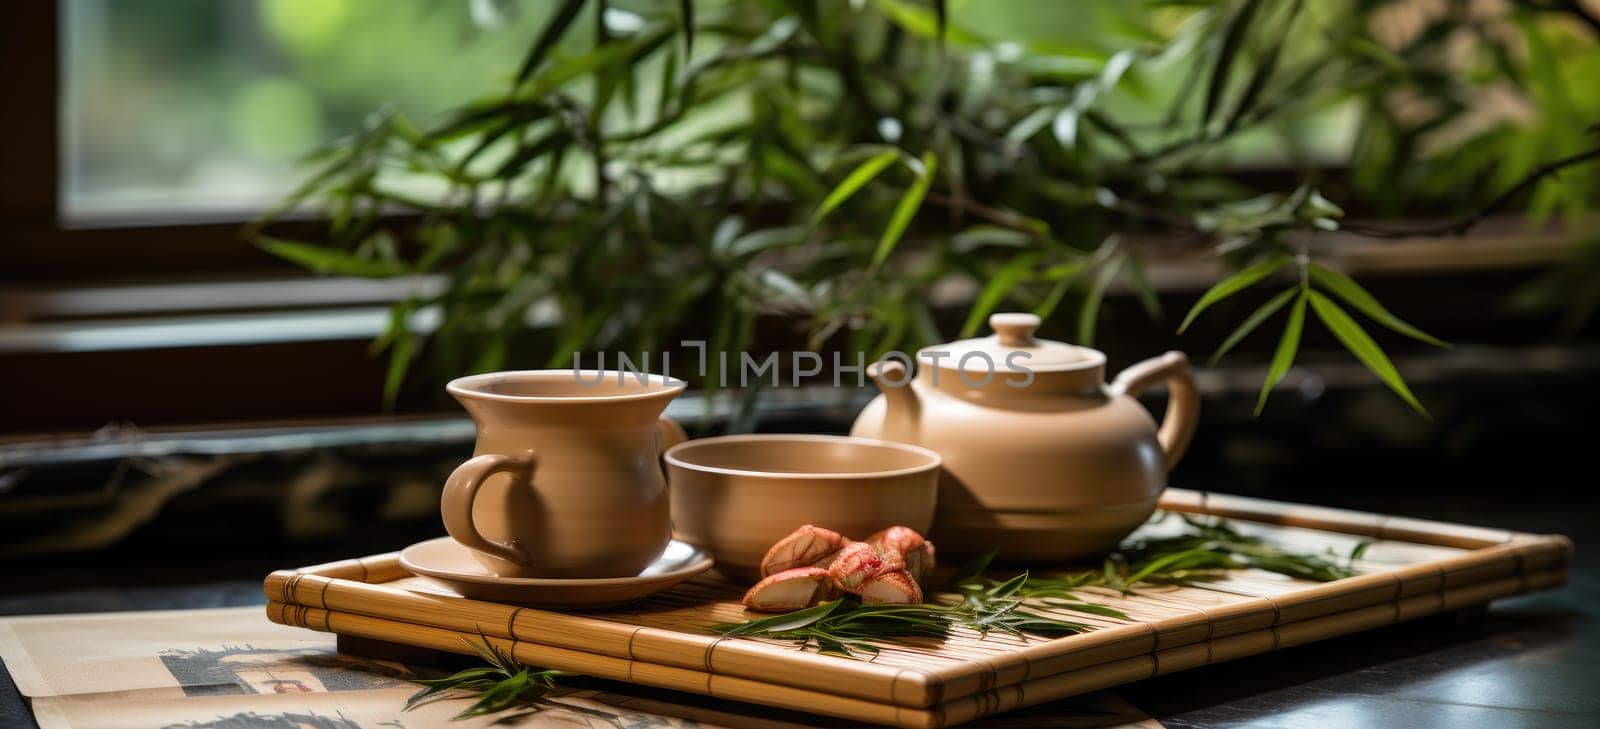 Accentuate the elegance of your tea presentation with this bamboo coaster that includes tea cups and a teapot. The modern and stylish design of the set gives the display a chic look.